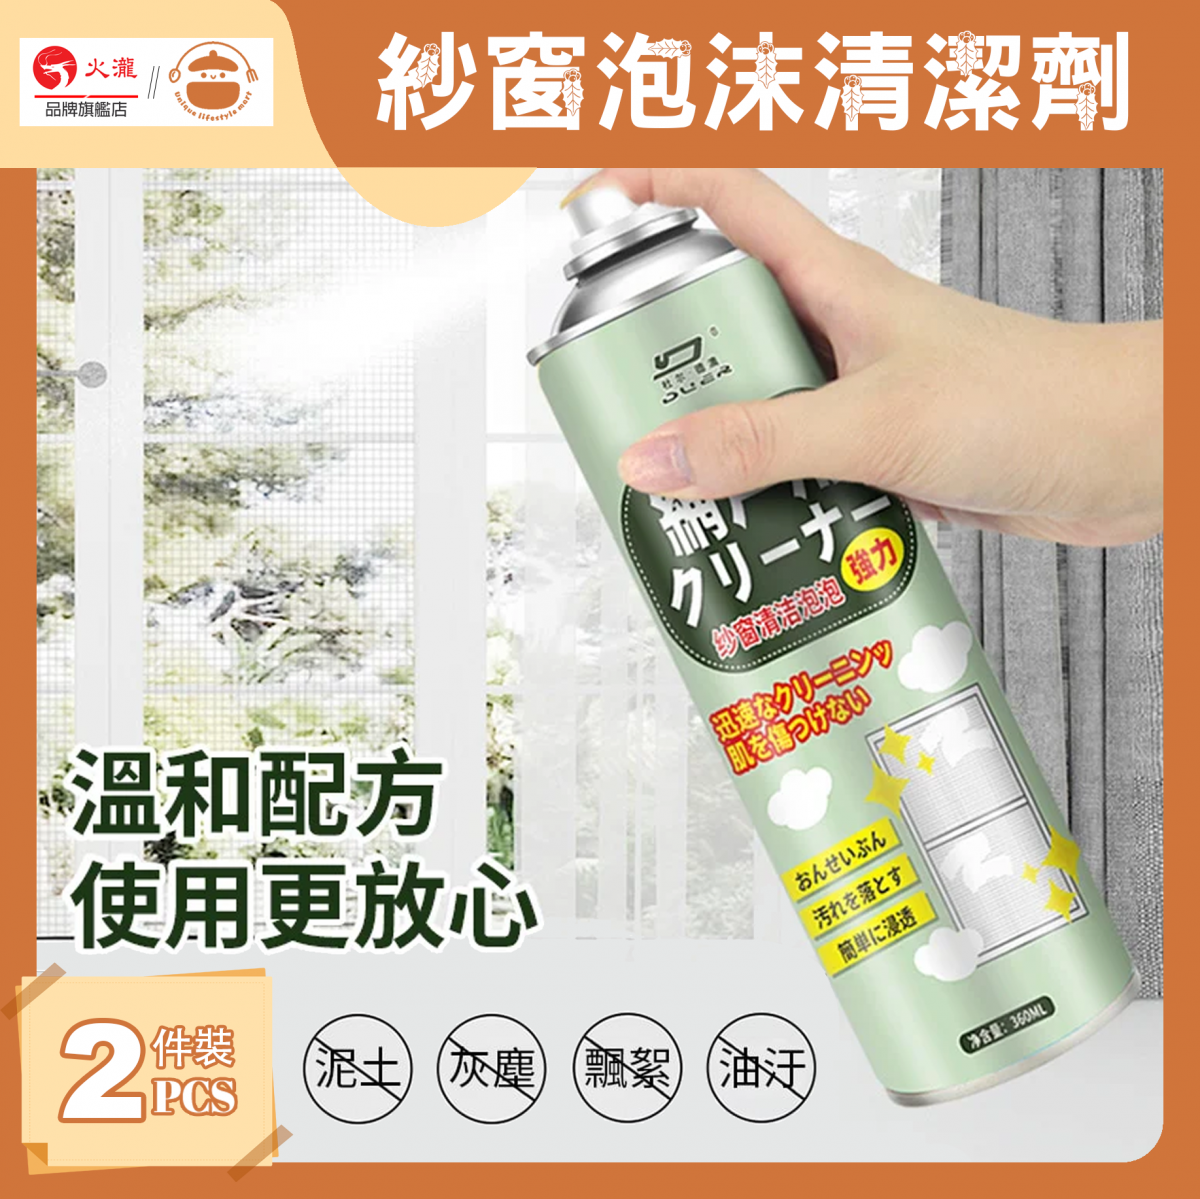 Non-removable and washable screen window strong foam cleaner 360ml【2 pieces】